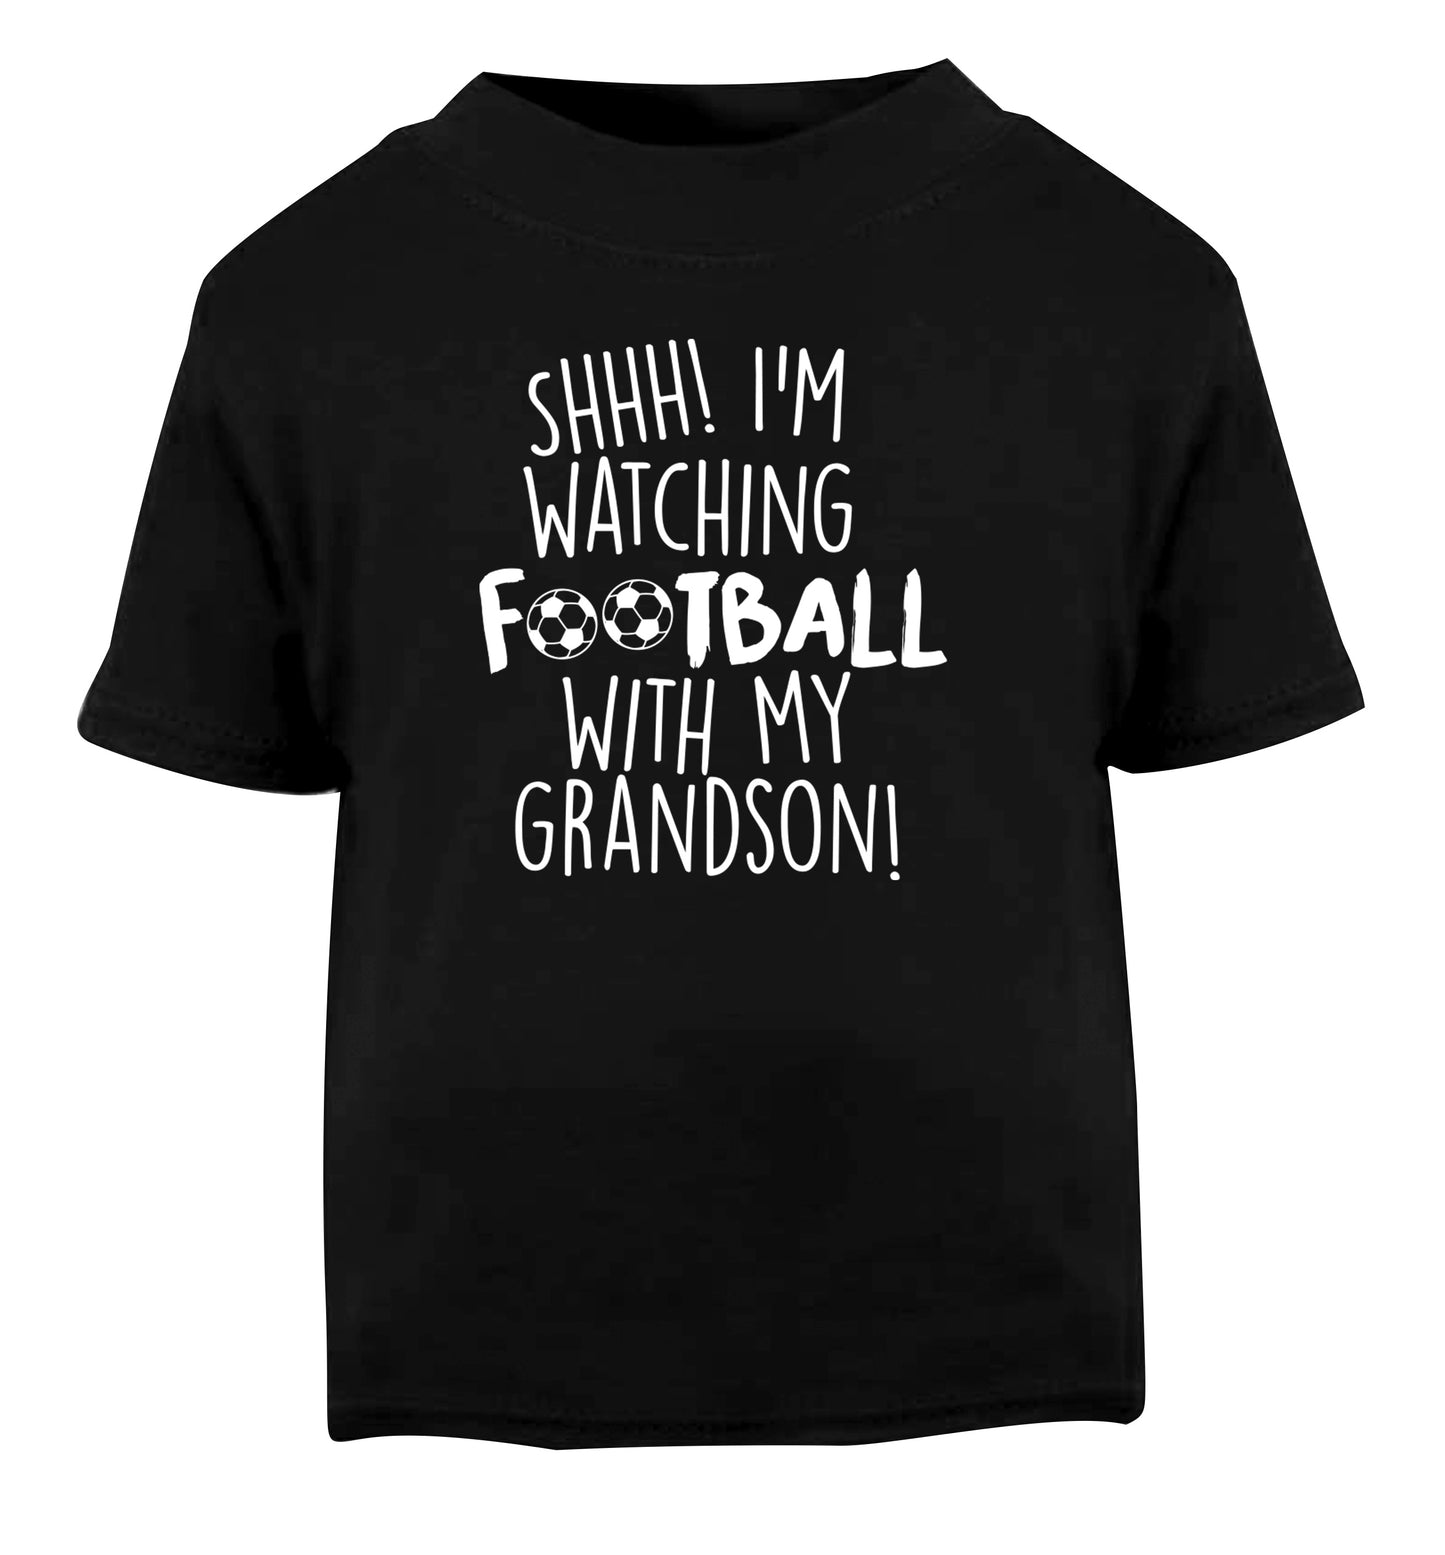 Shhh I'm watching football with my grandson Black Baby Toddler Tshirt 2 years